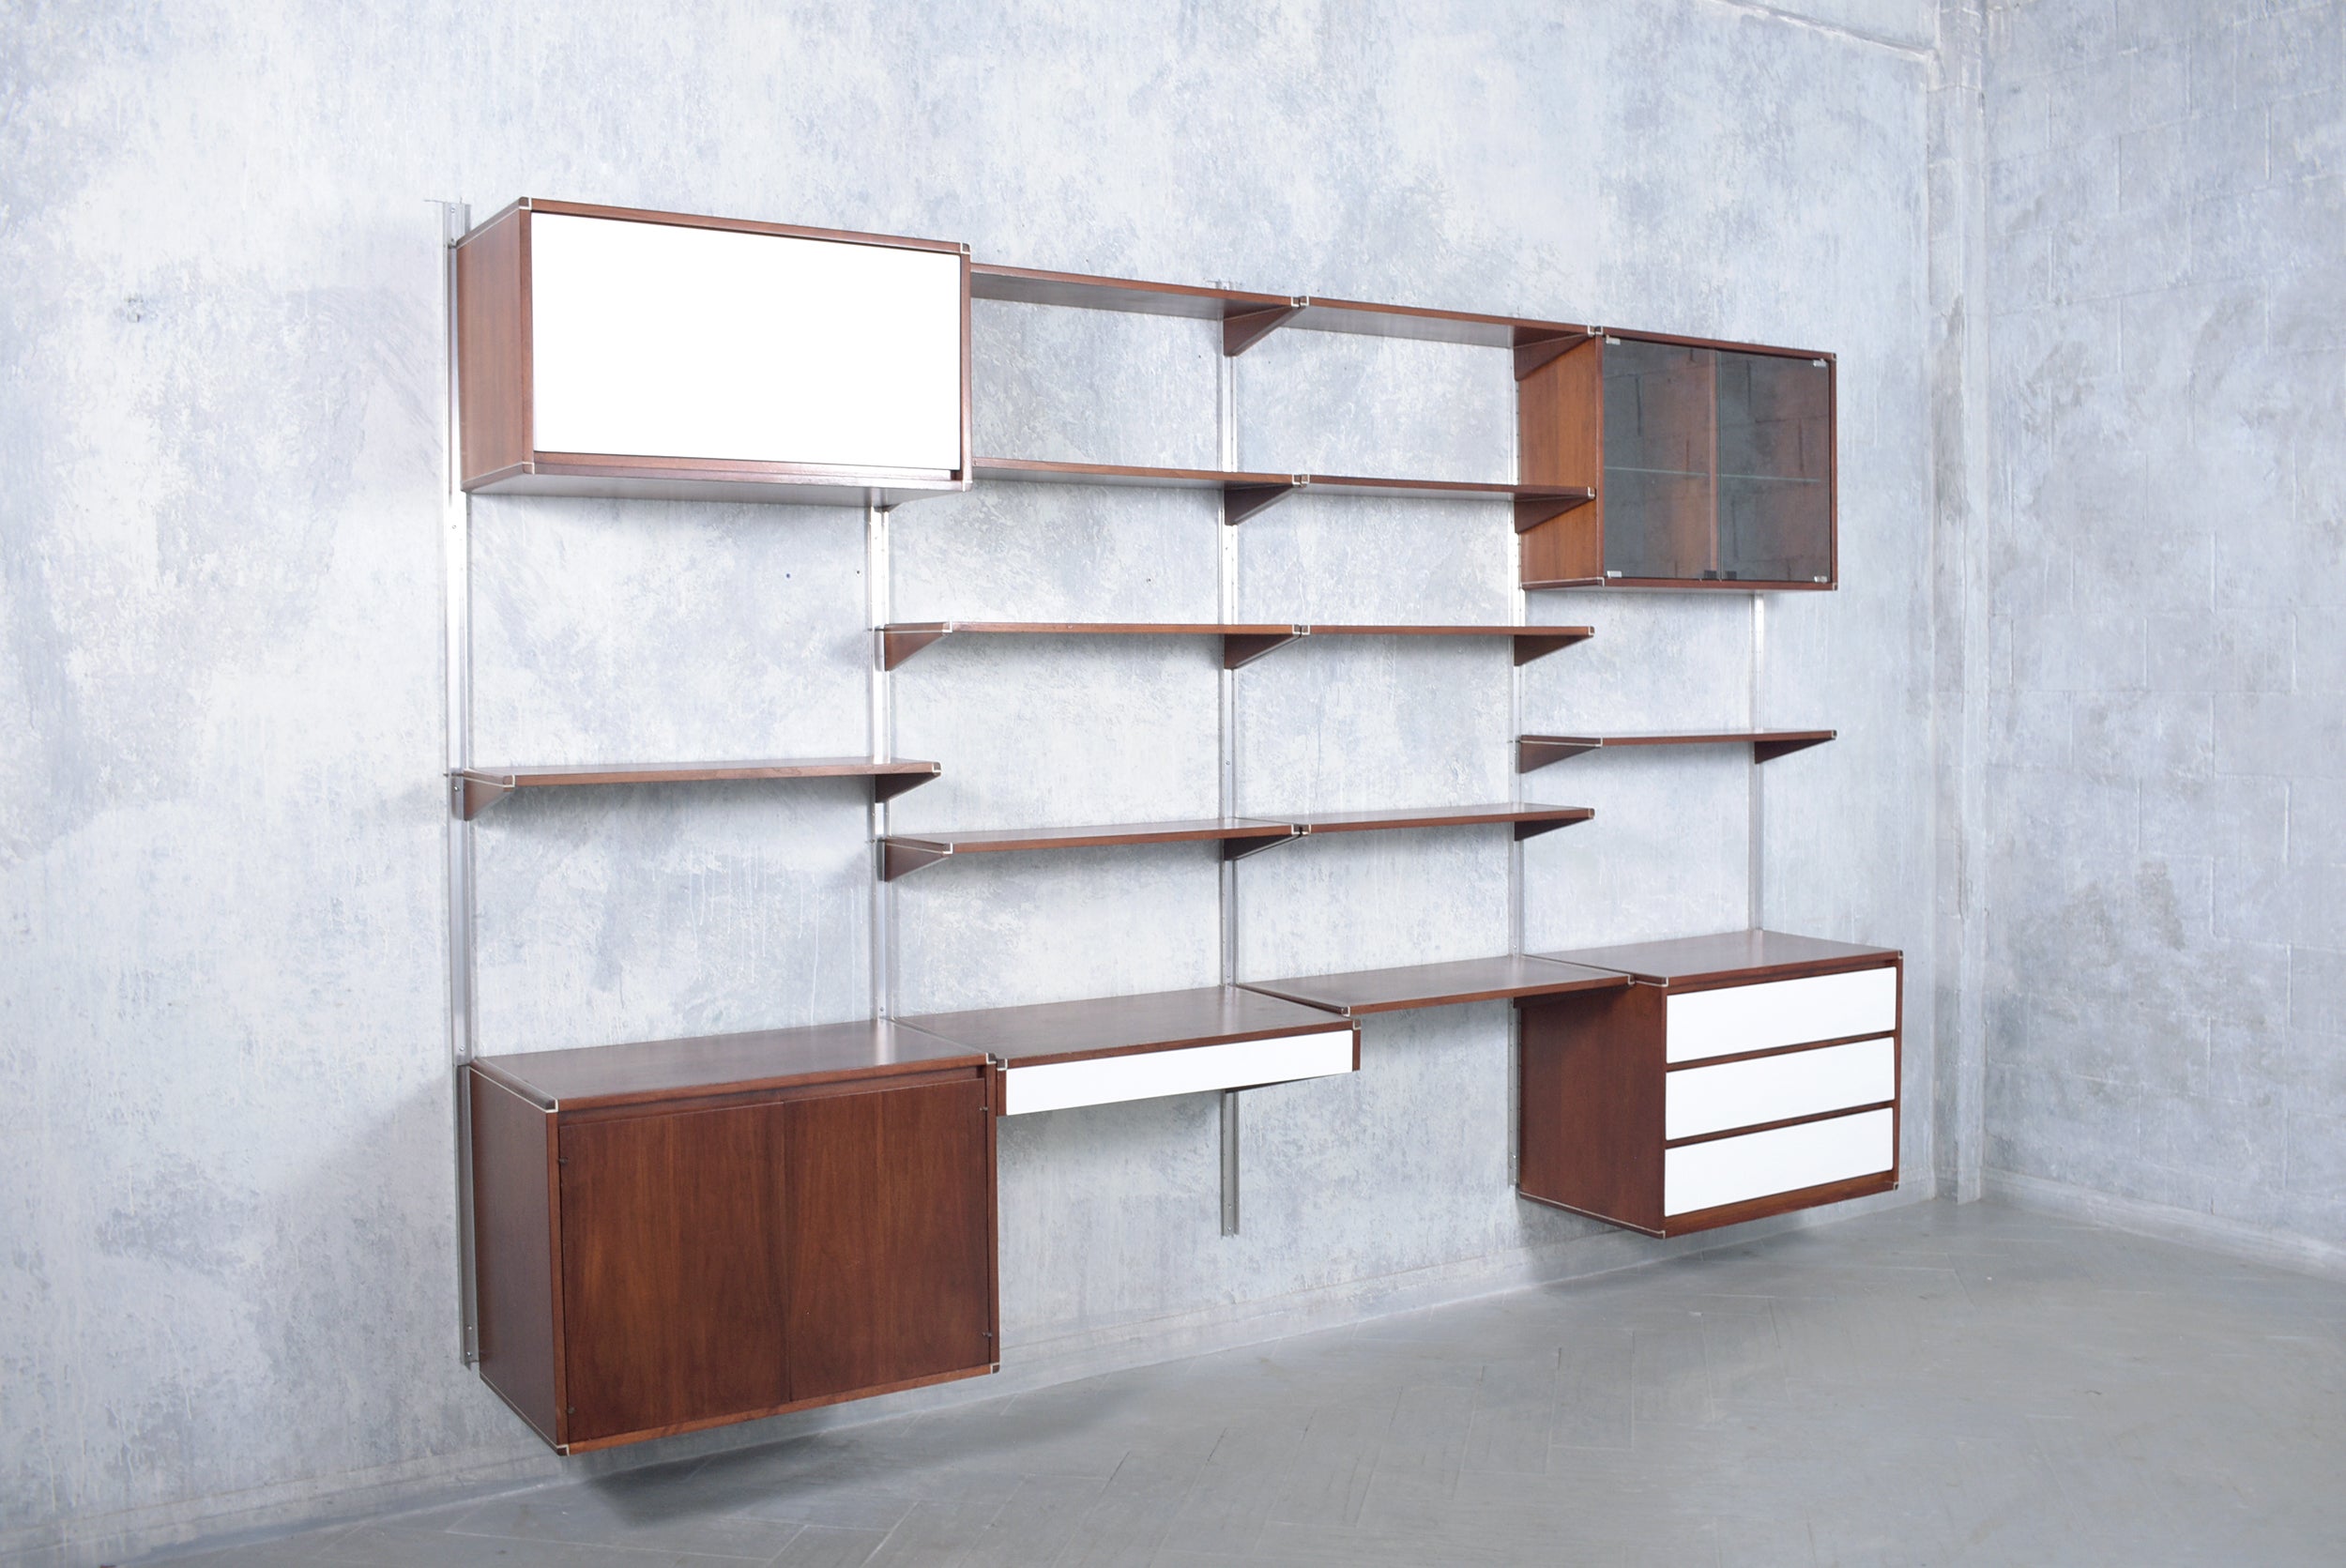 Journey back to the 1960s with our Danish modern bookshelf masterfully handcrafted from mahogany and in excellent condition. Skillfully restored and refinished by our expert craftsmen, this piece now boasts a rich walnut stain with white and black